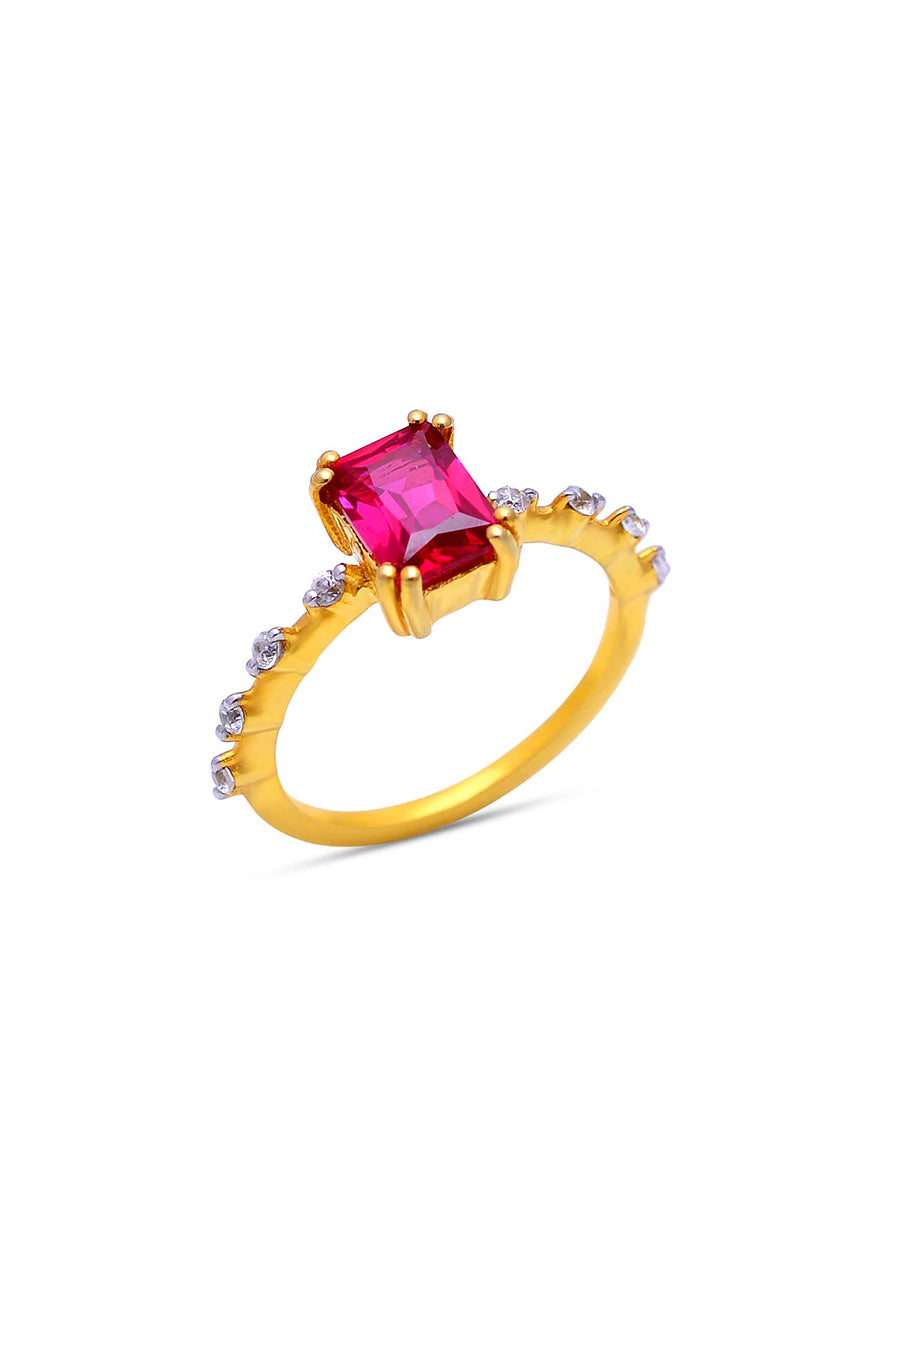 Genuine Ruby Star Studded Ring in 925 Silver